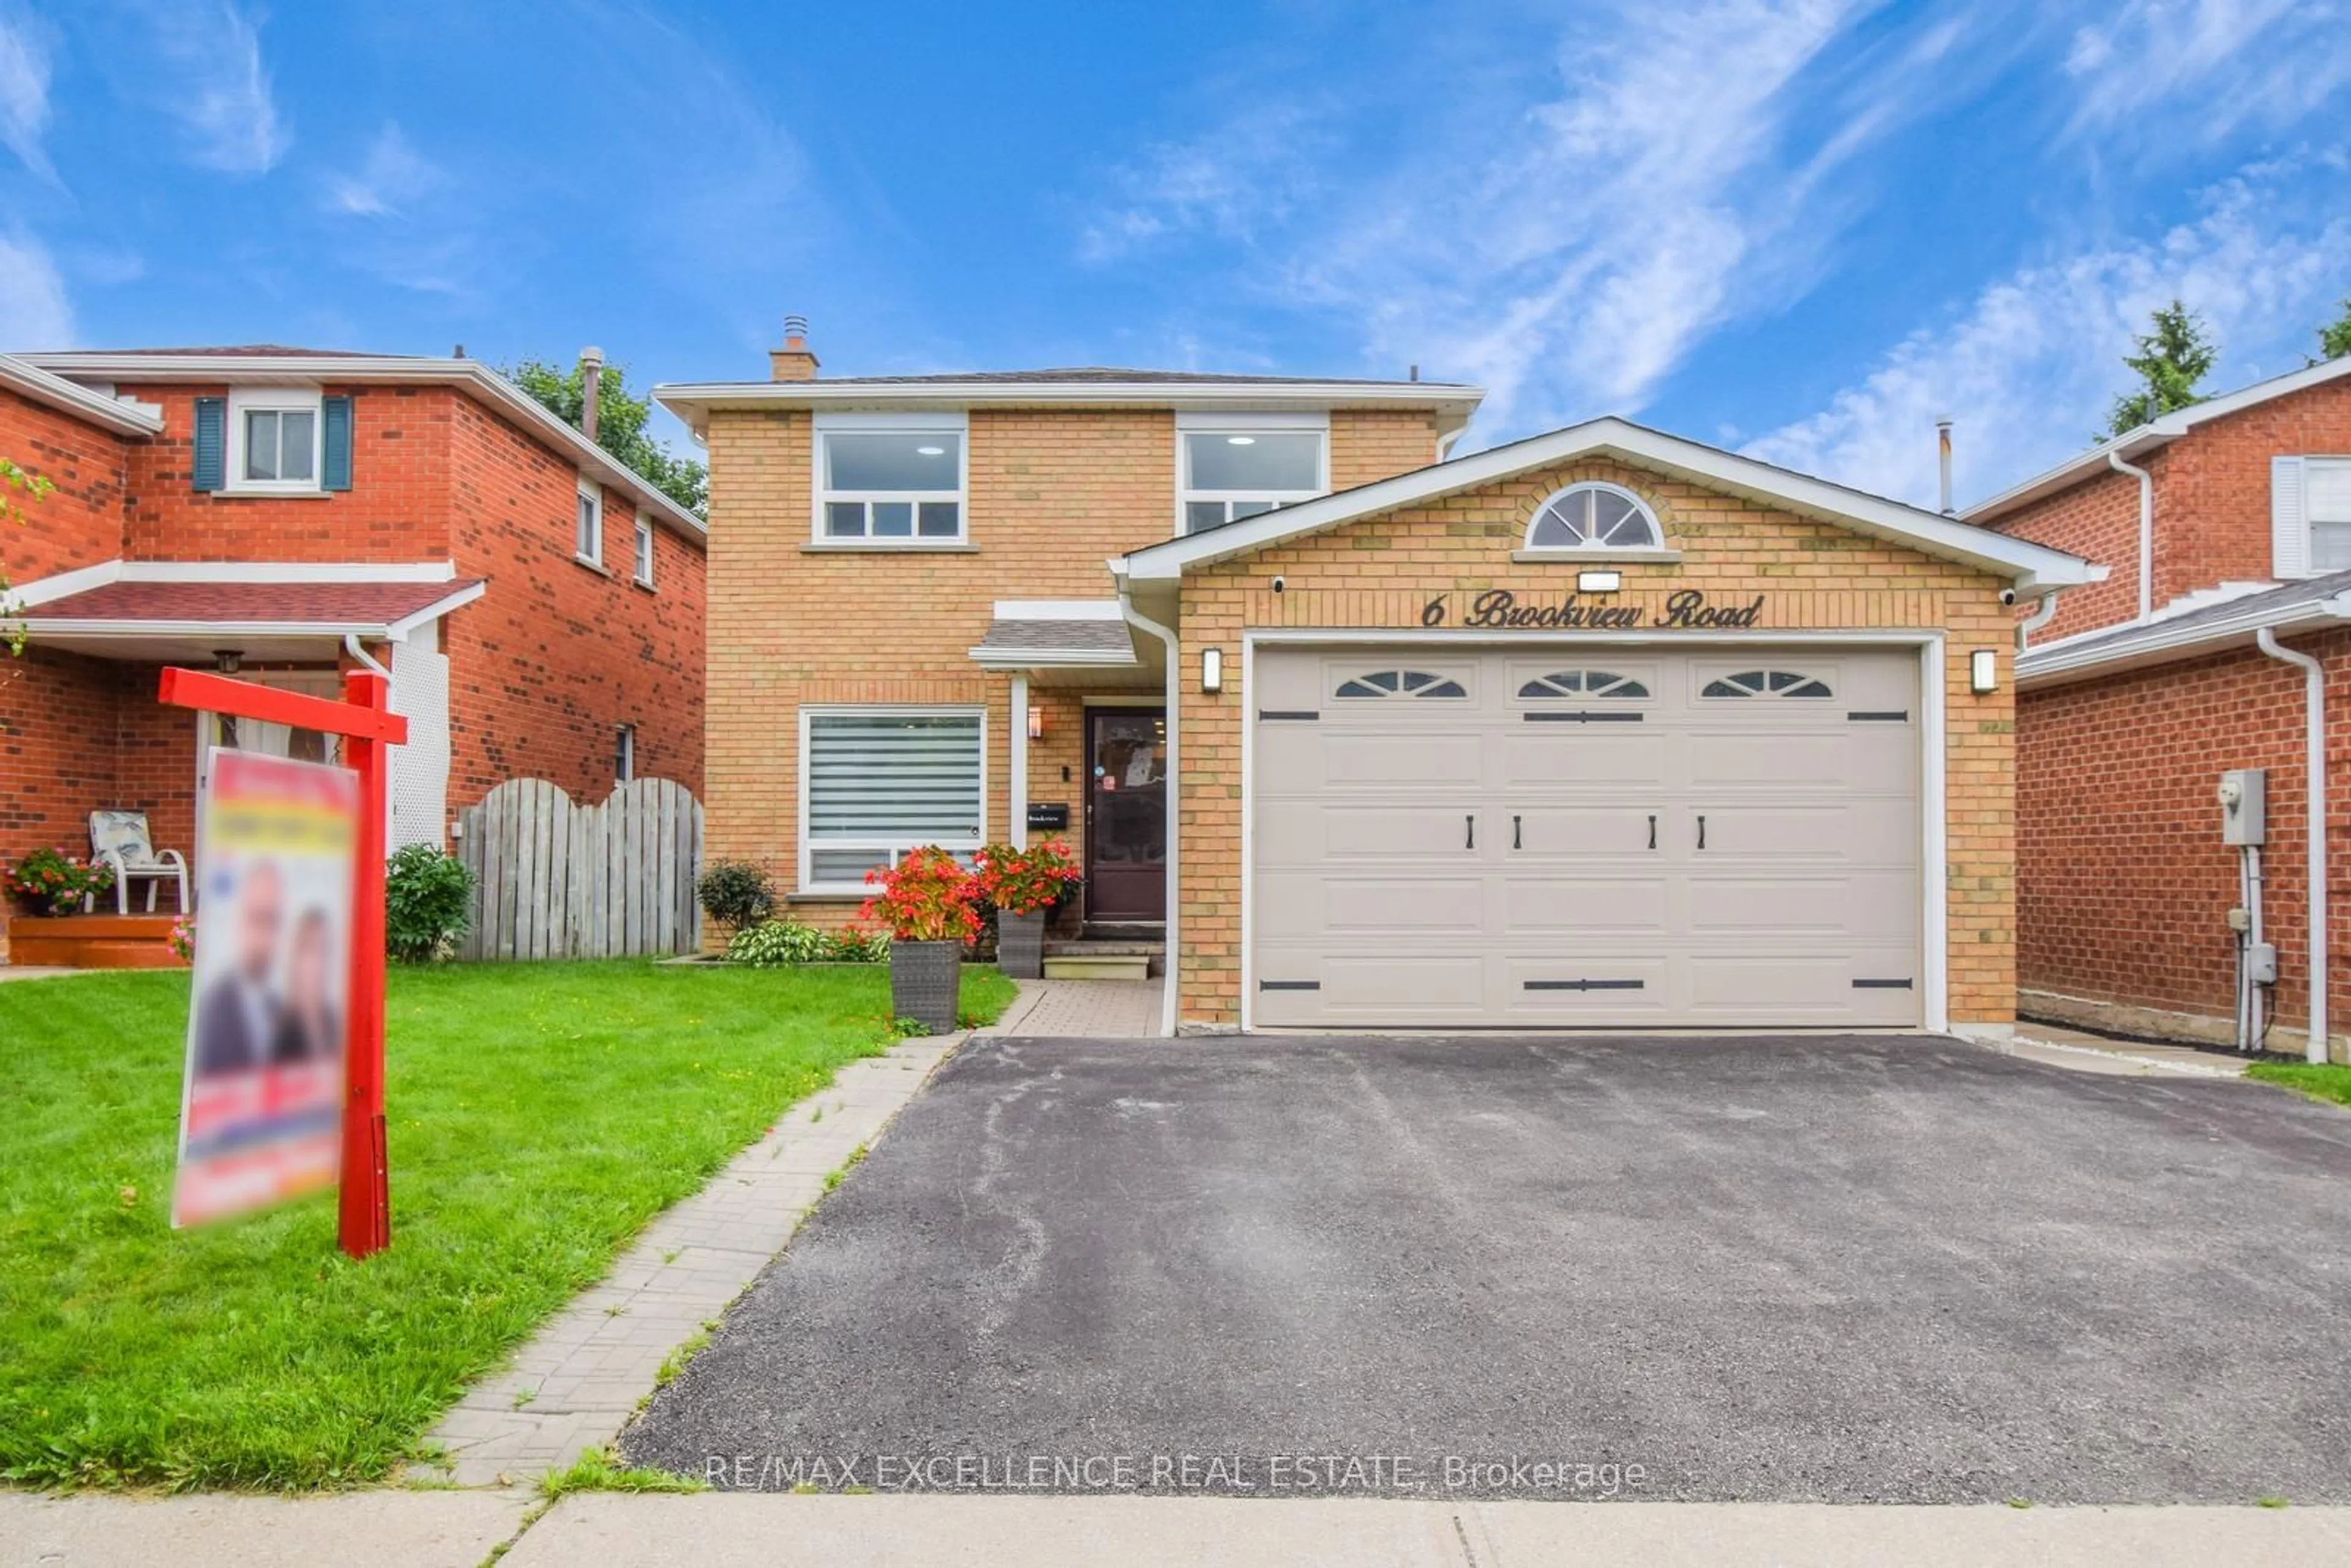 Home with brick exterior material for 6 Brookview Rd, Brampton Ontario L6X 2V9